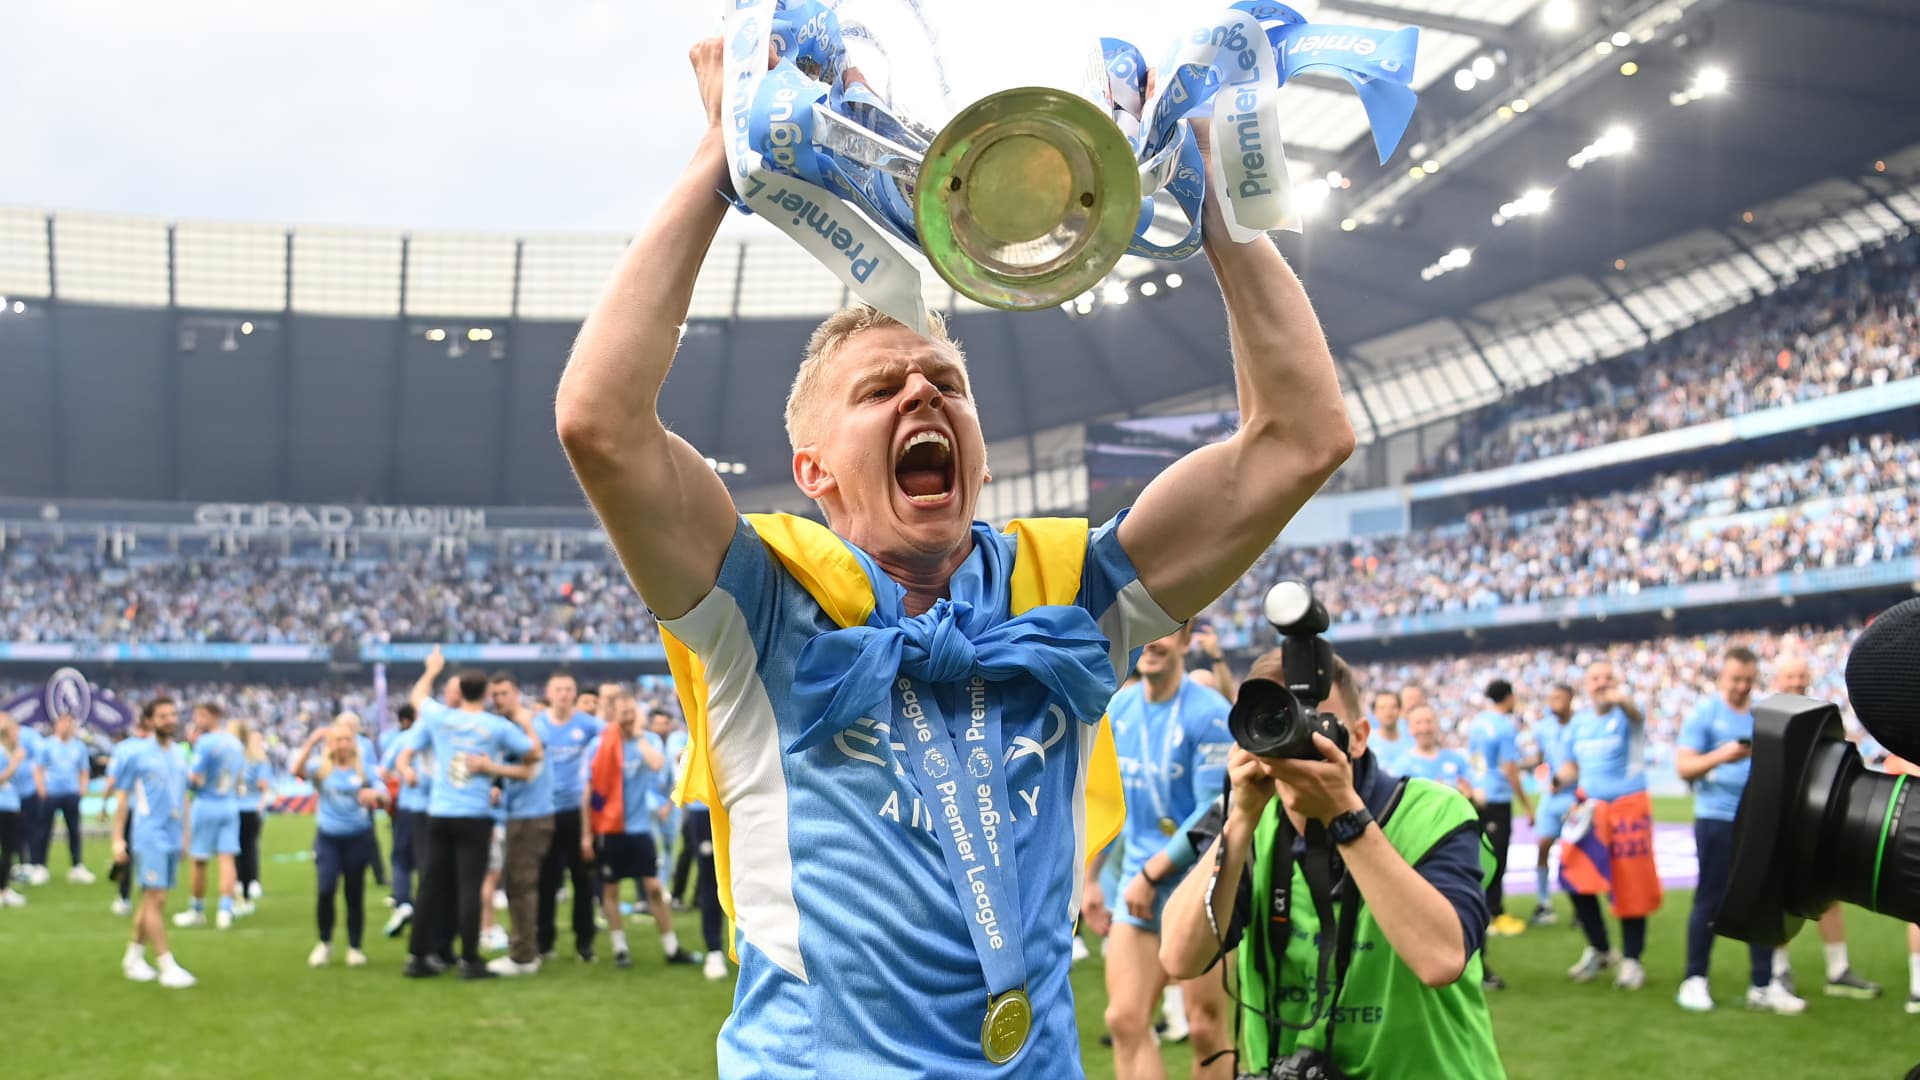 Oleksandr Zinchenko of Manchester City celebrates with the Premier League trophy and a Ukrainian flag after their side finished the season as Premier League champions during the Premier League match between Manchester City and Aston Villa at Etihad Stadium on May 22, 2022 in Manchester, England. 